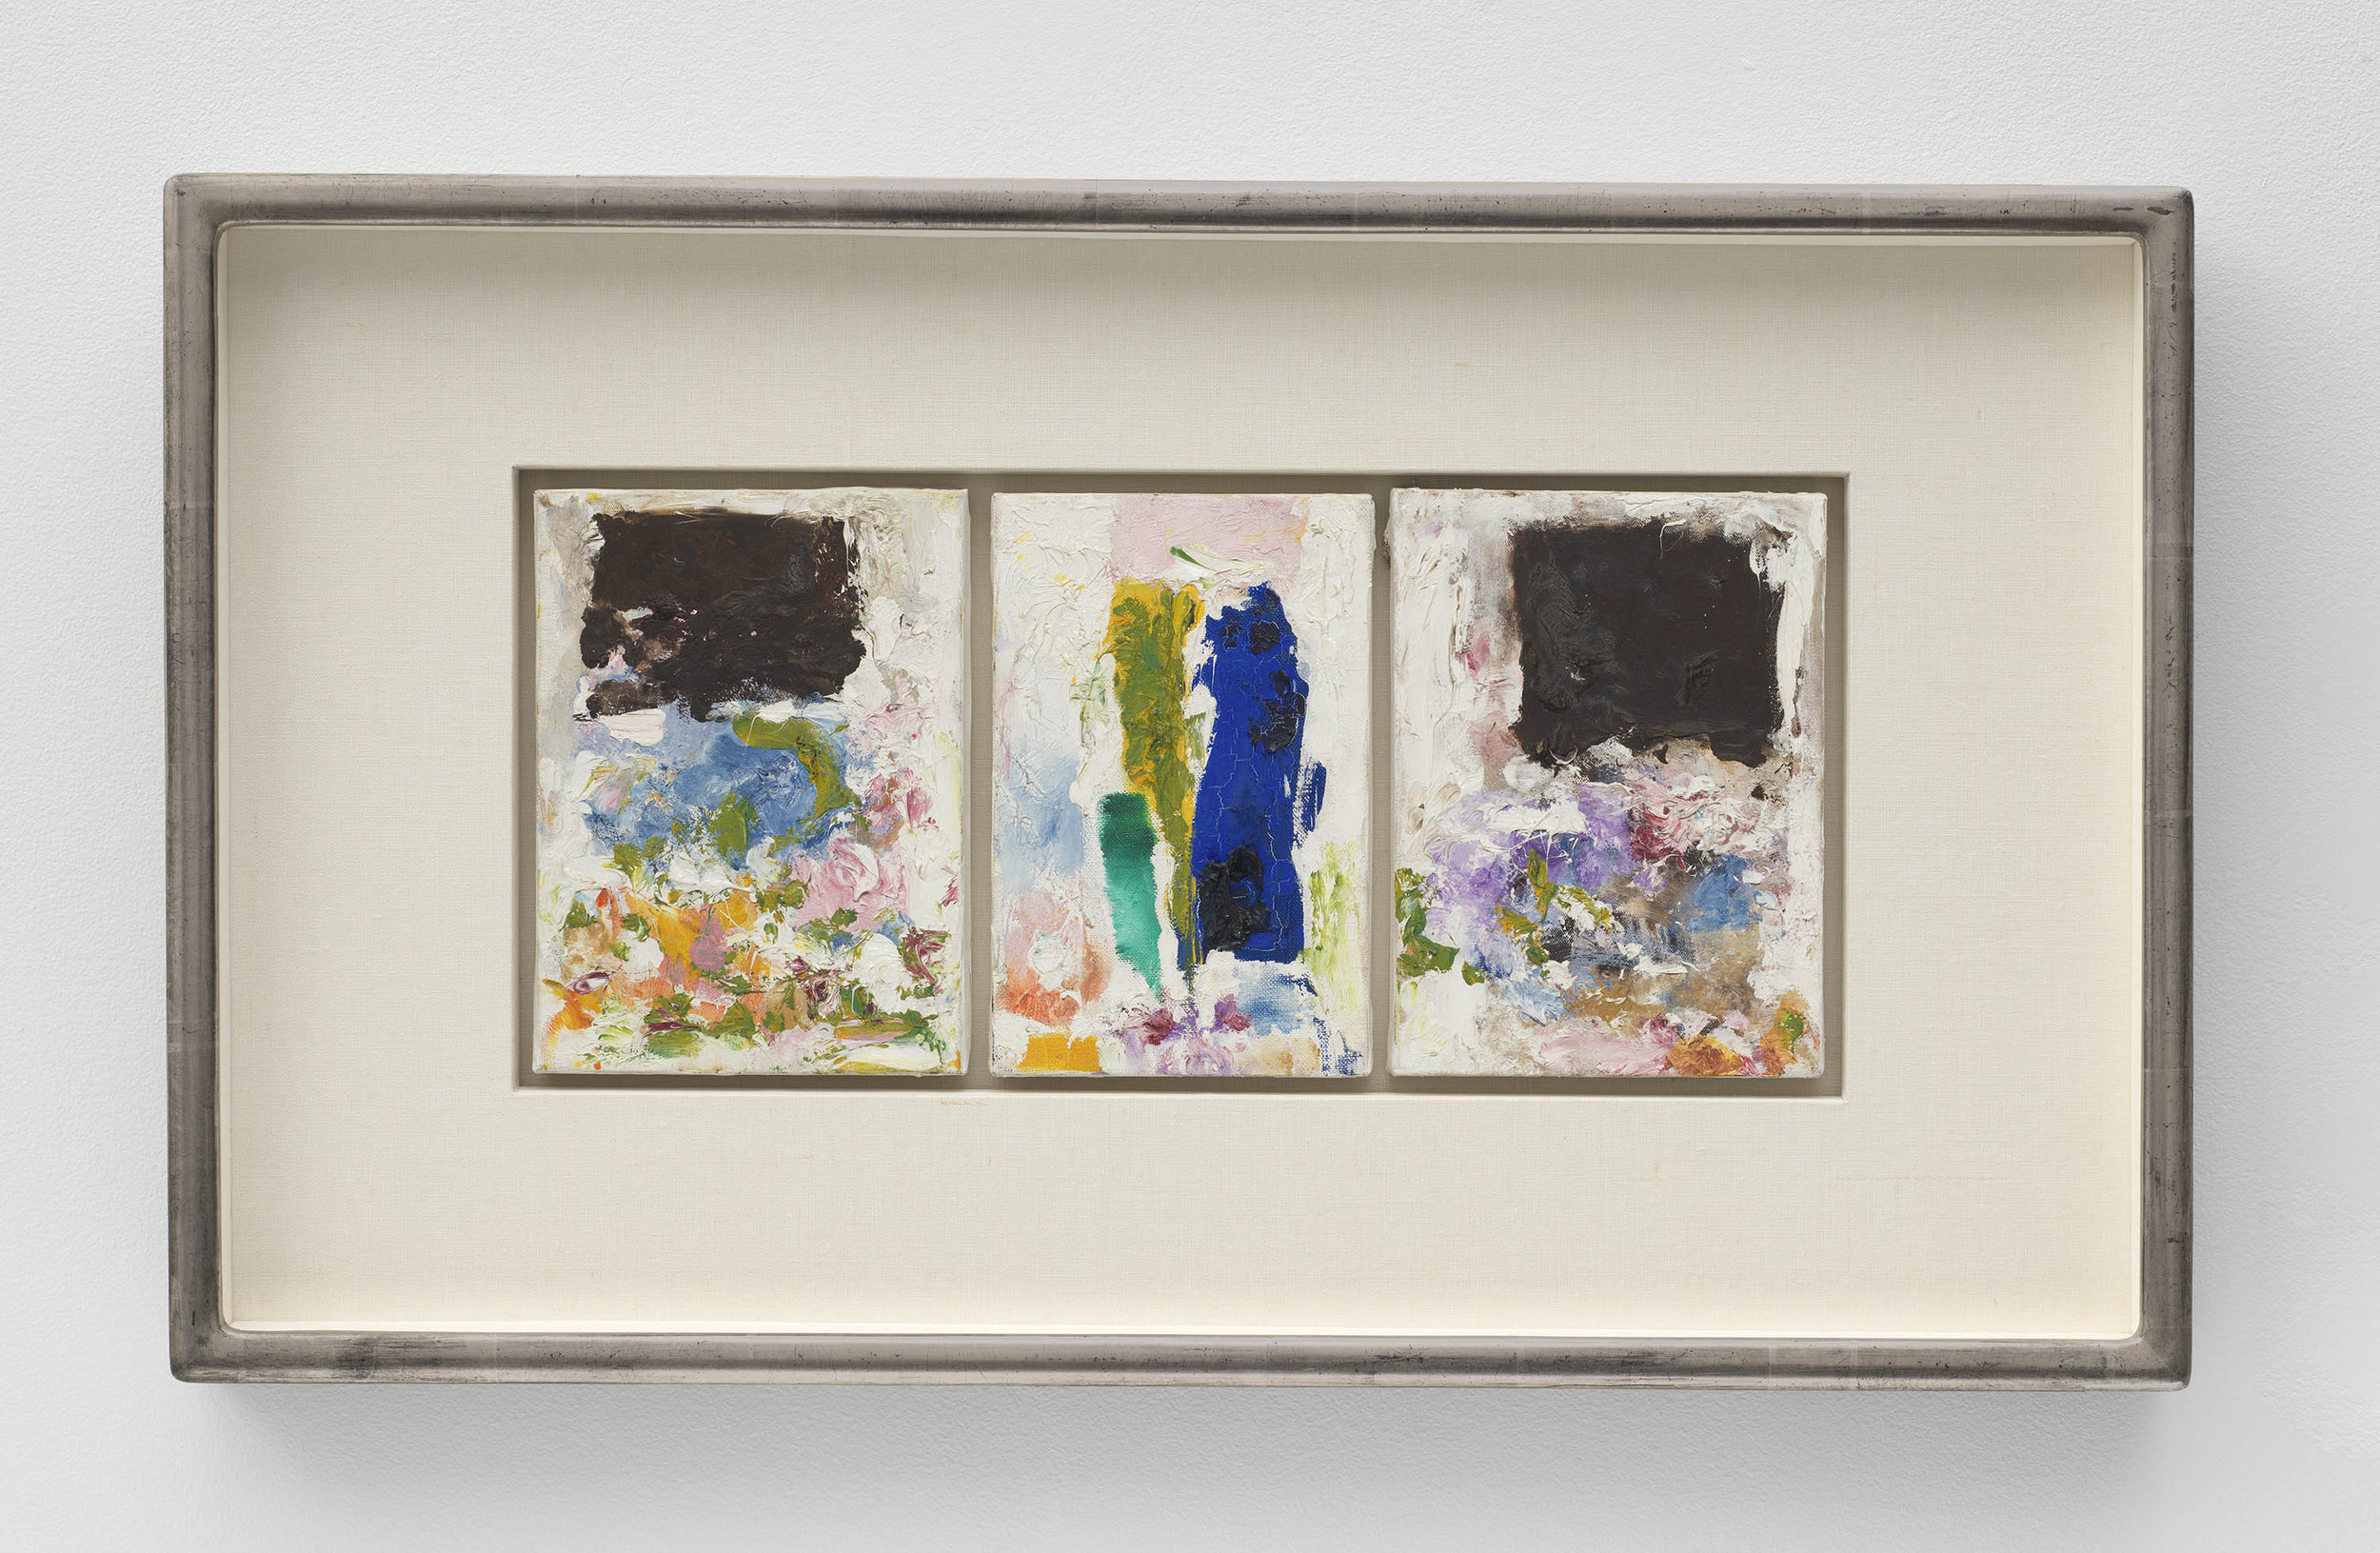   Joan Mitchell,   Untitled , 1974-1975, Oil on canvas in three (3) parts, 8 5/8 x 19 1/8 inches, 21.9 x 48.6 cm, Framed: 17 3/4 x 29 3/4 x 2 inches, 45.1 x 75.6 x 5.1 cm 